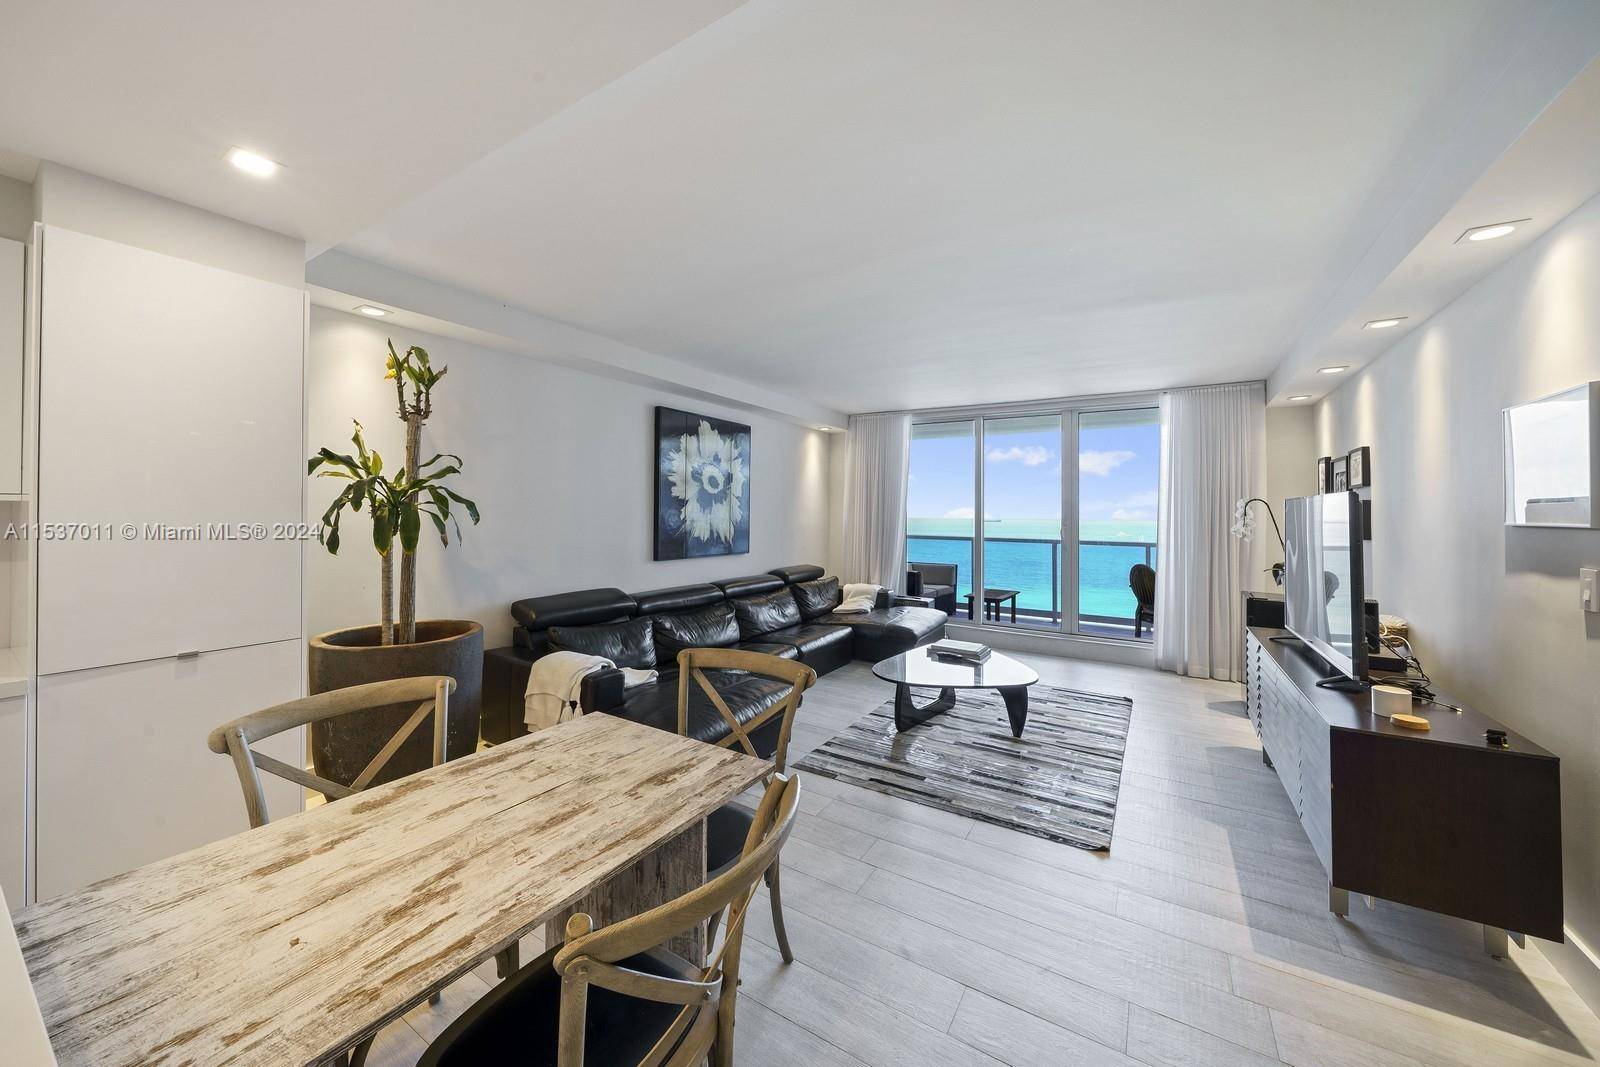 This gorgeous oceanfront unit was combined creating an expansive and luxurious residence with stunning views of the ocean.